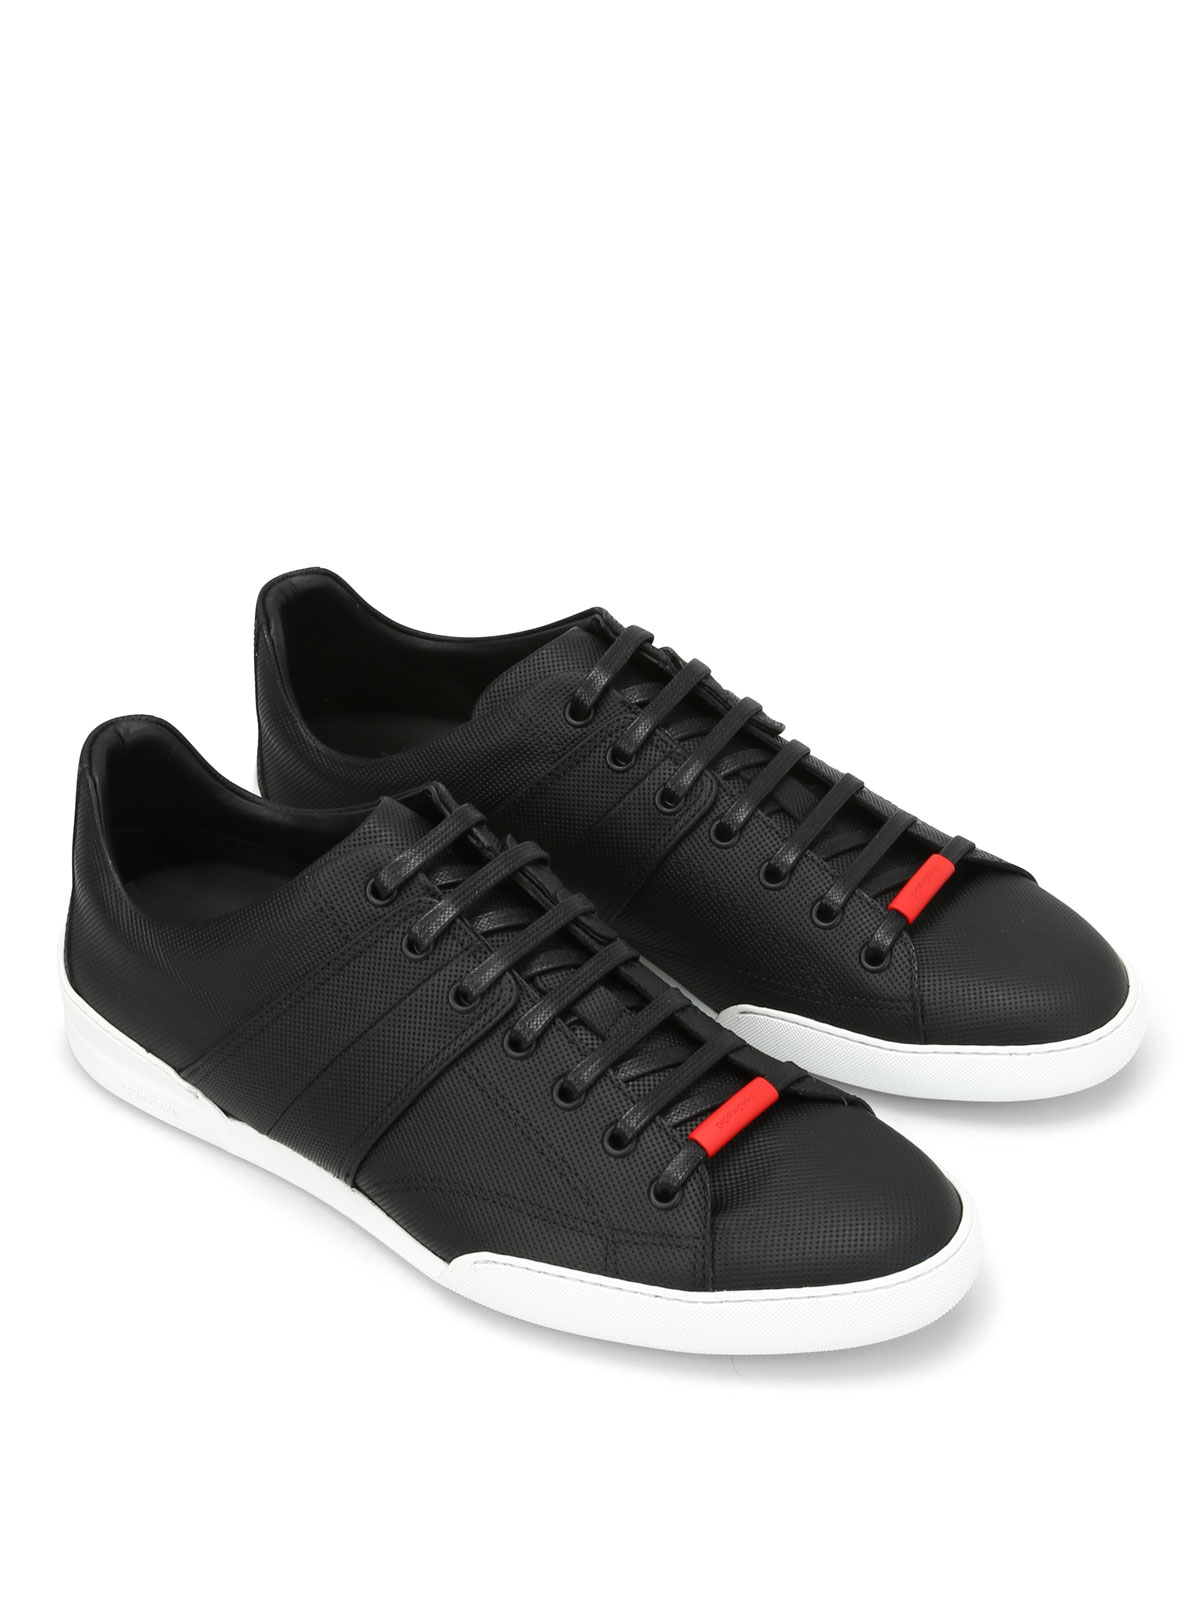 Dior - B18 sneakers - trainers - 3SN197XNH900 | Shop online at iKRIX